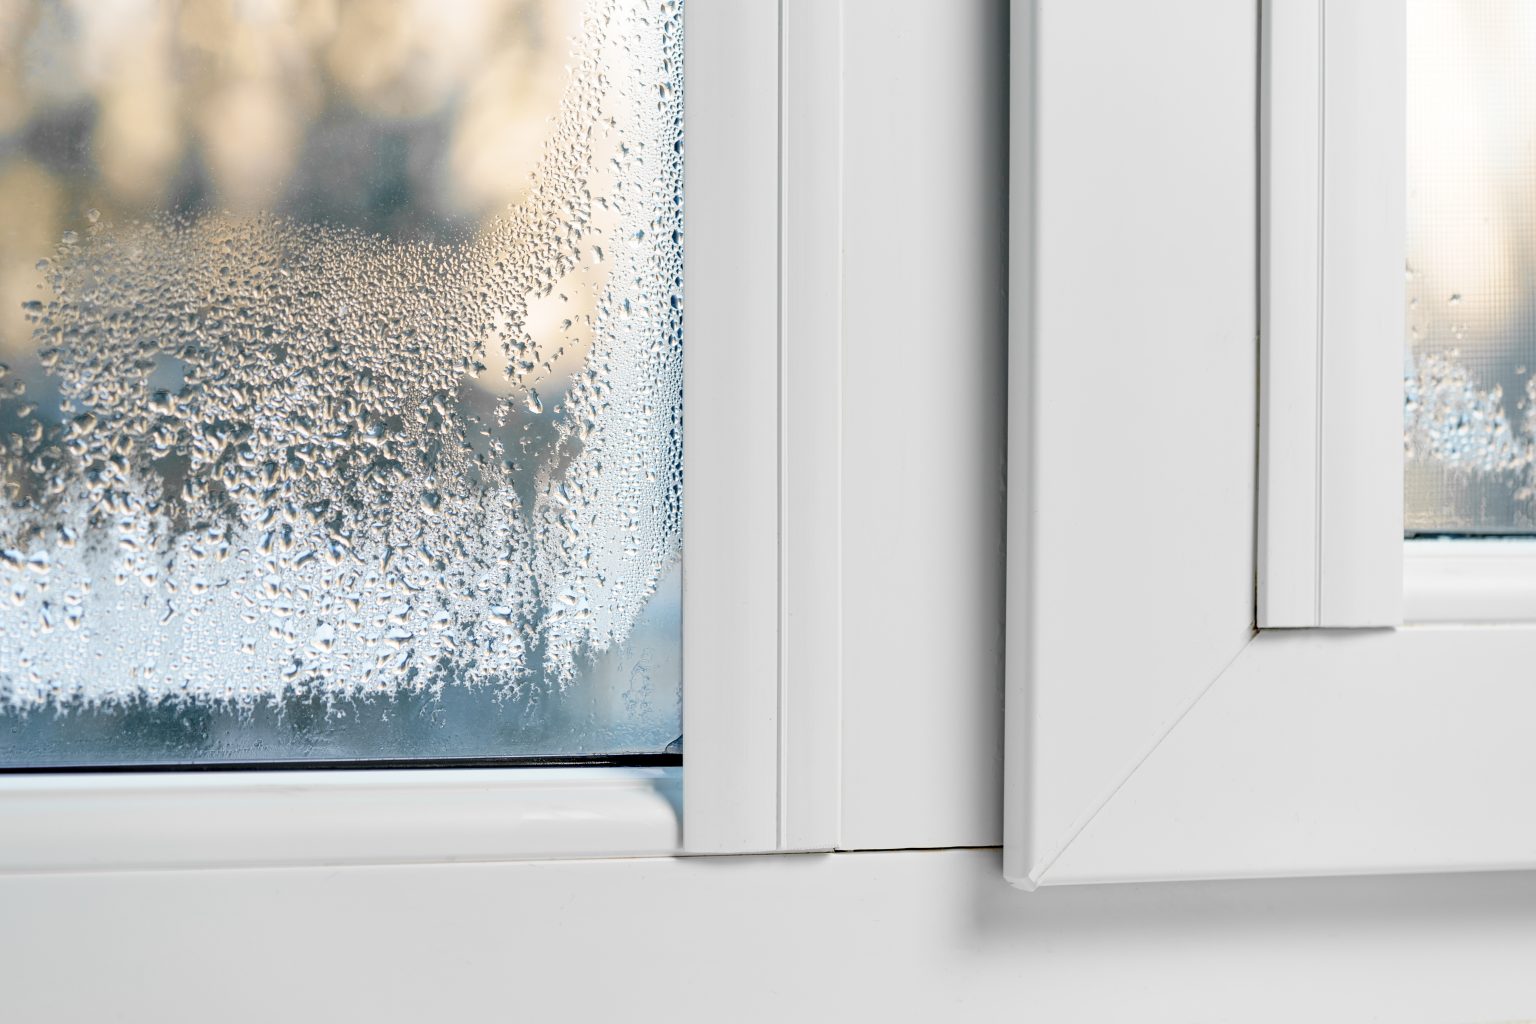 double glazed windows in addressing rain-related issues